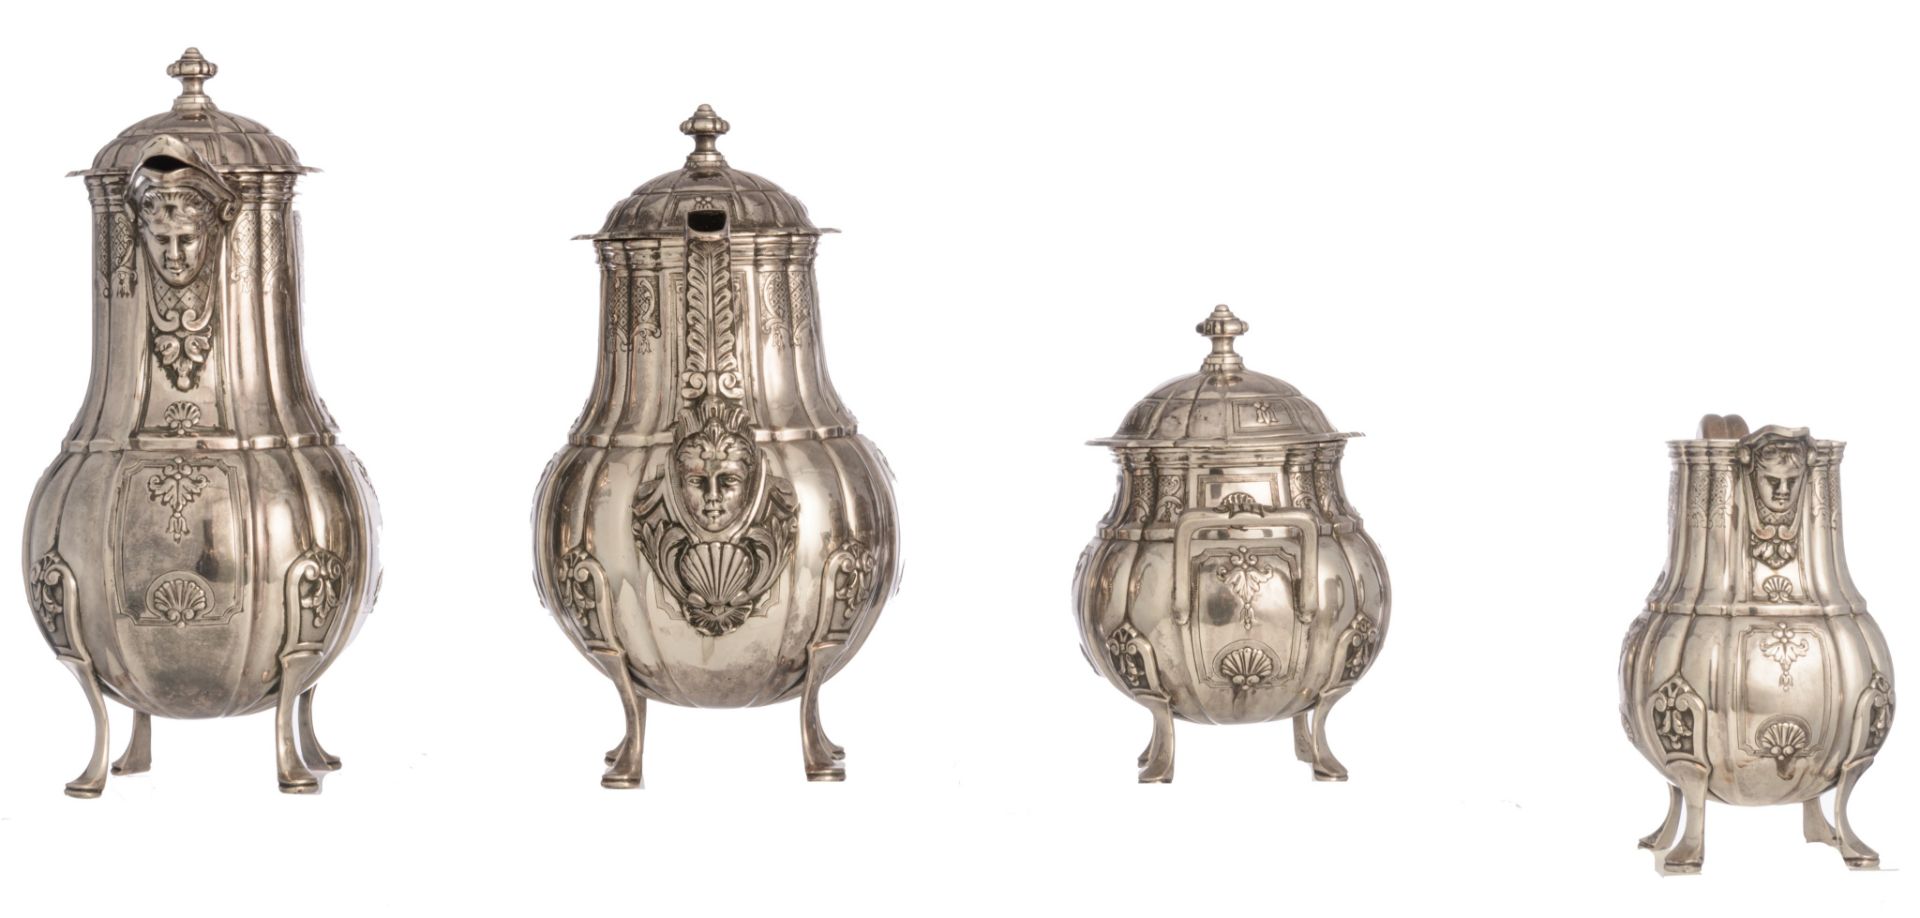 A four-part Belgian silver coffee and tea set, H 15 - 29 cm / total weight c. 4.290 g - Image 4 of 13